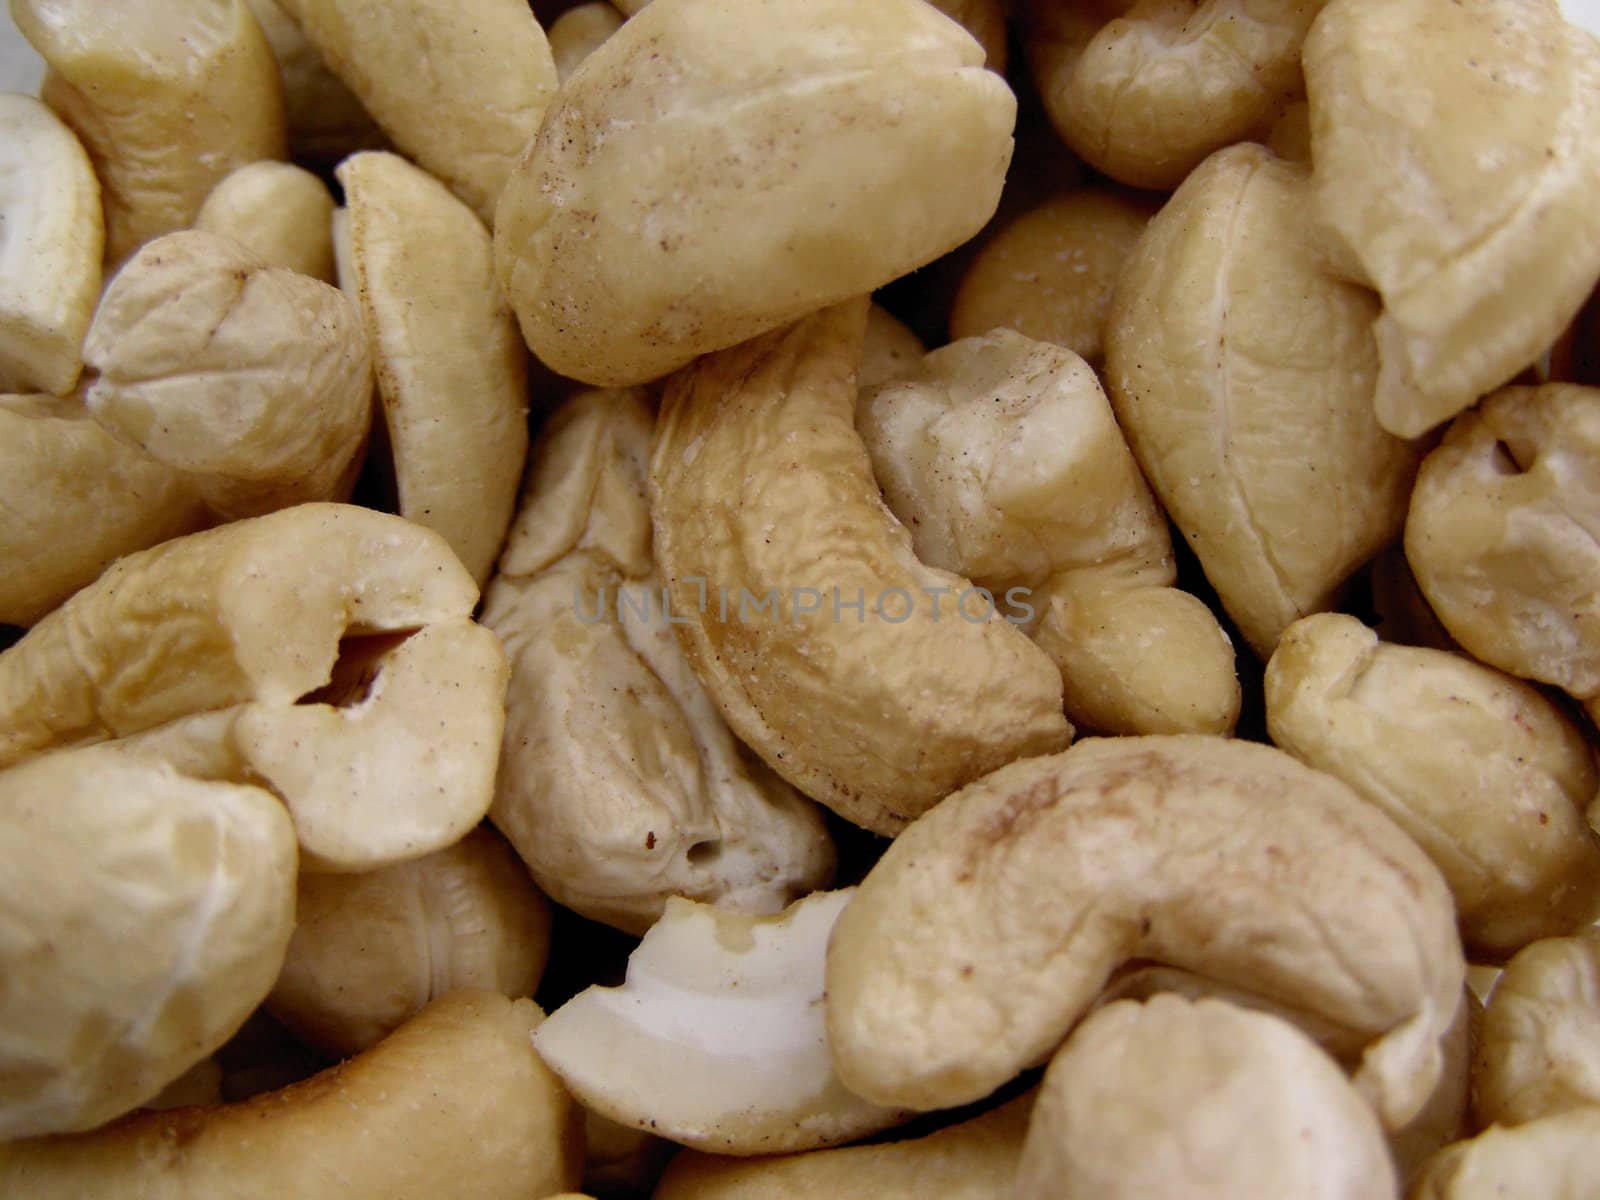 cashew nuts by paolo77